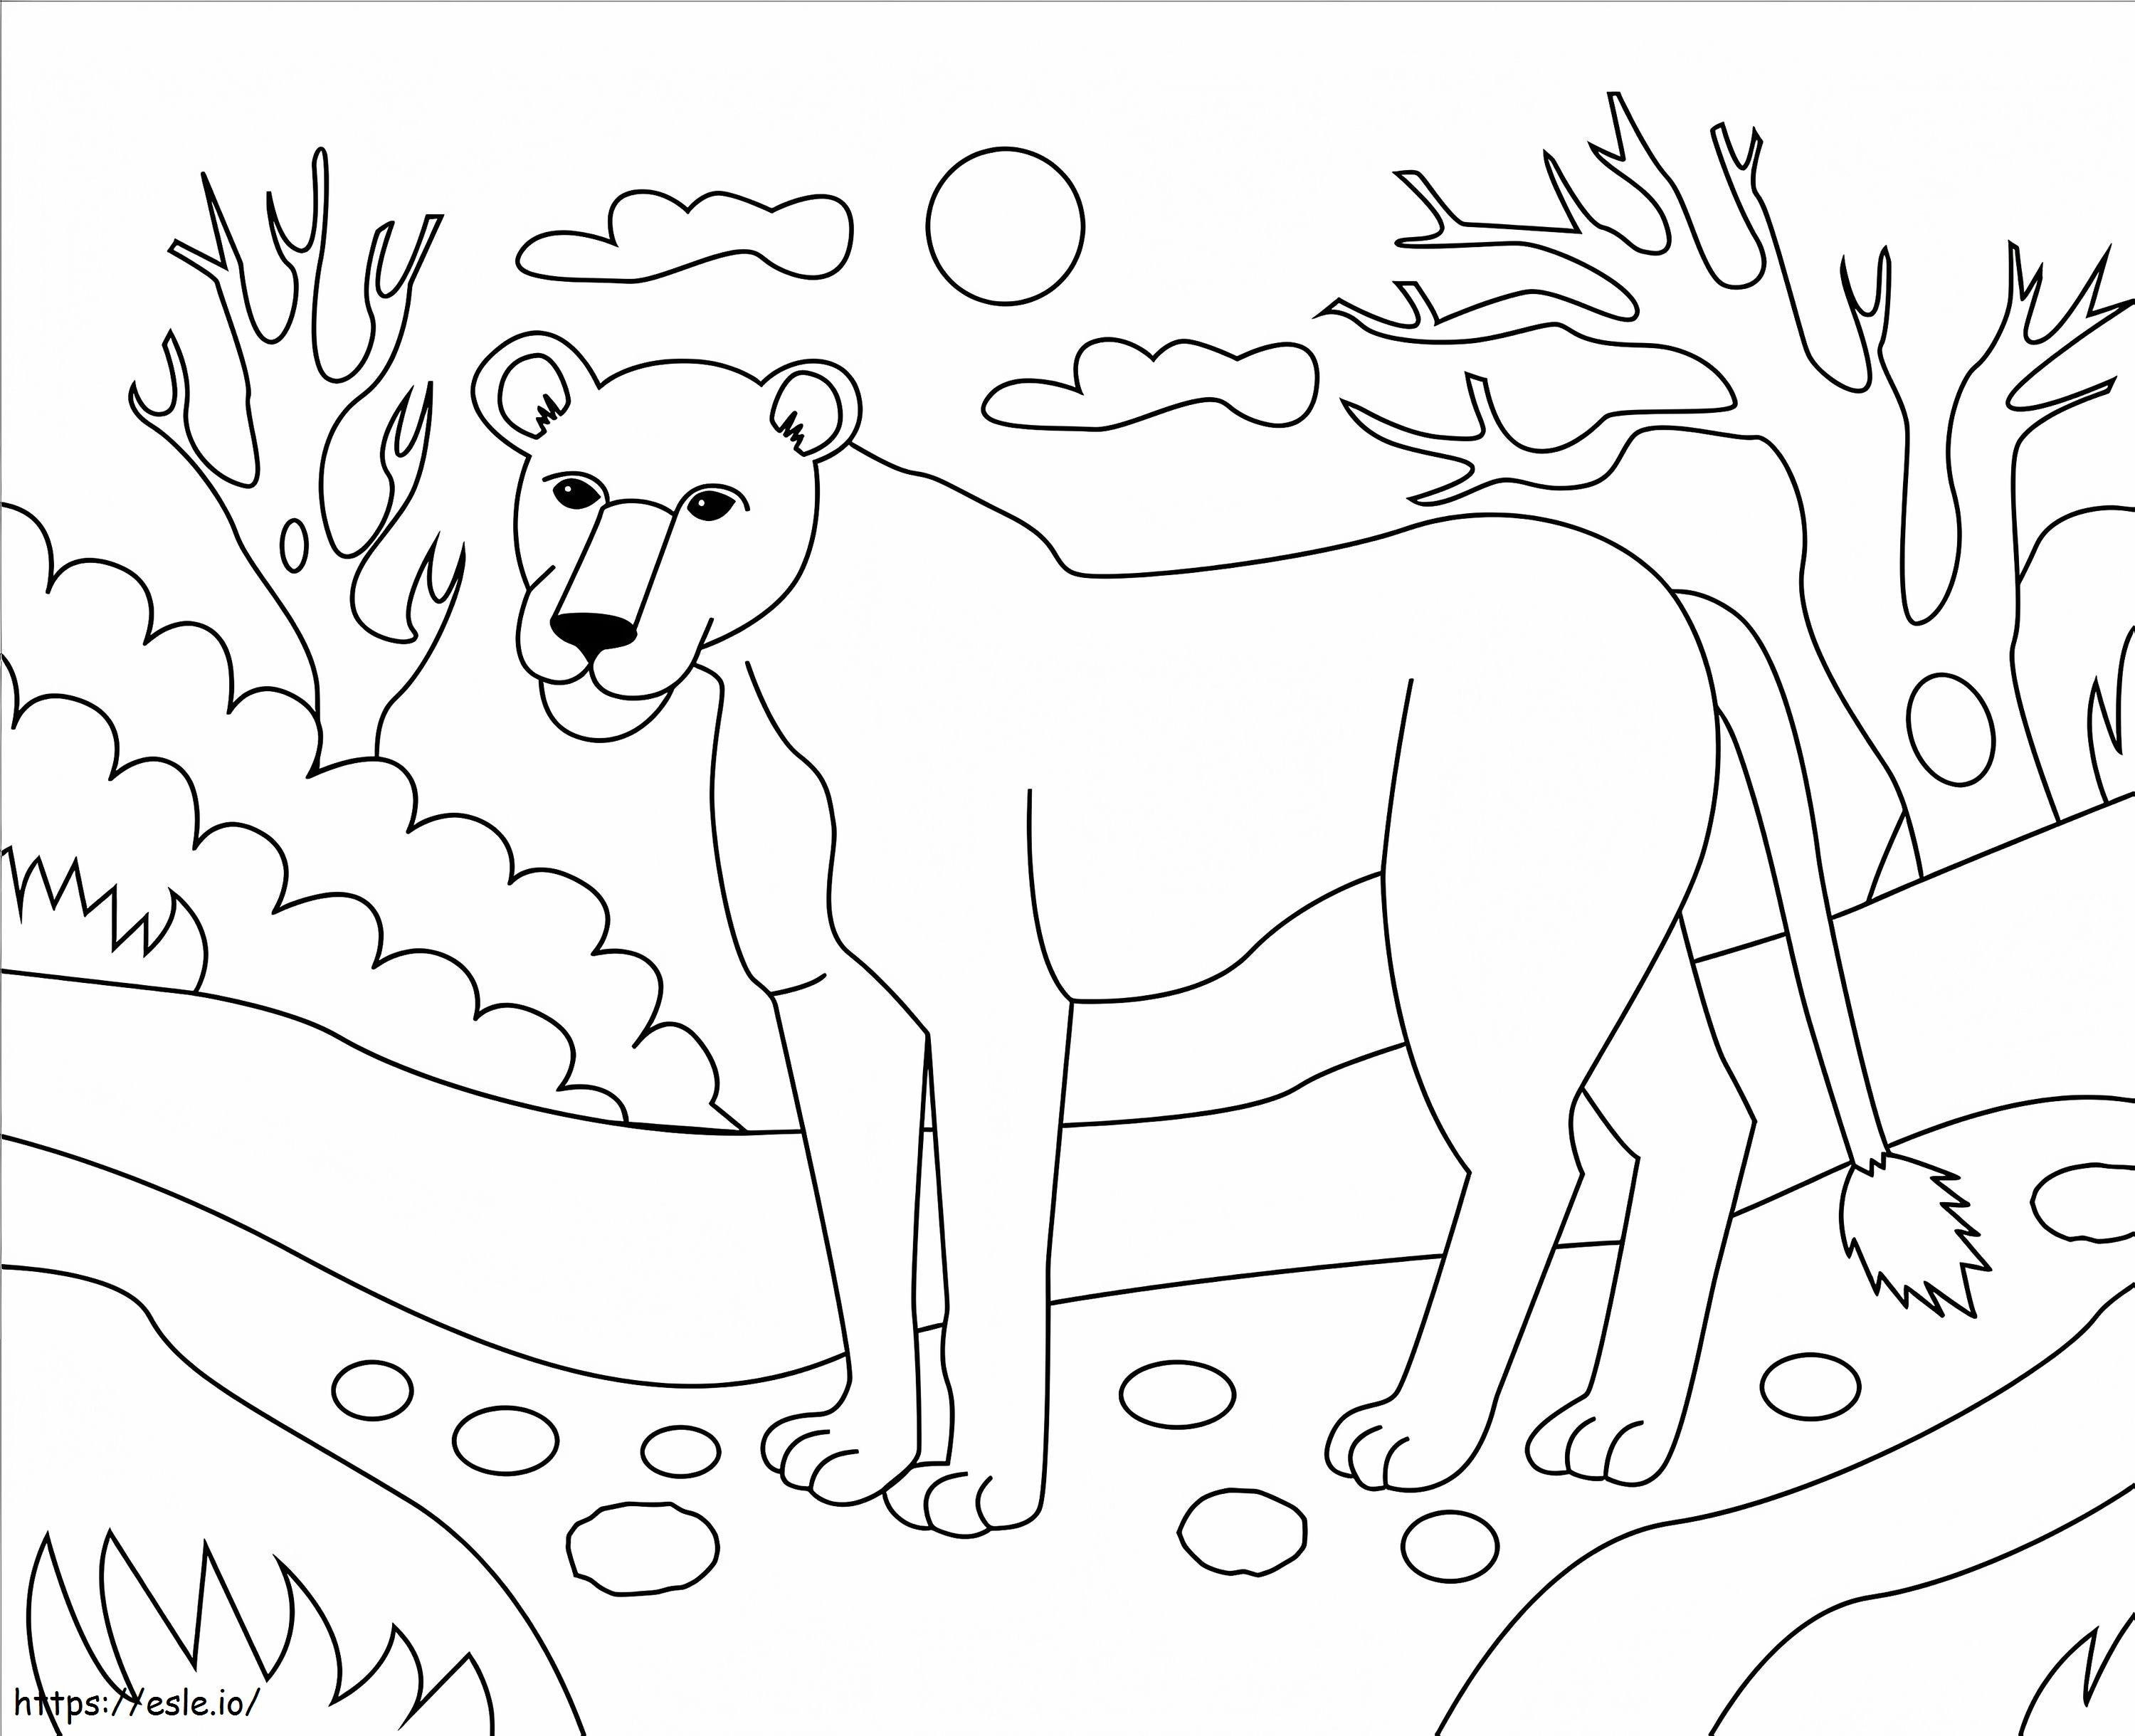 Lioness coloring page